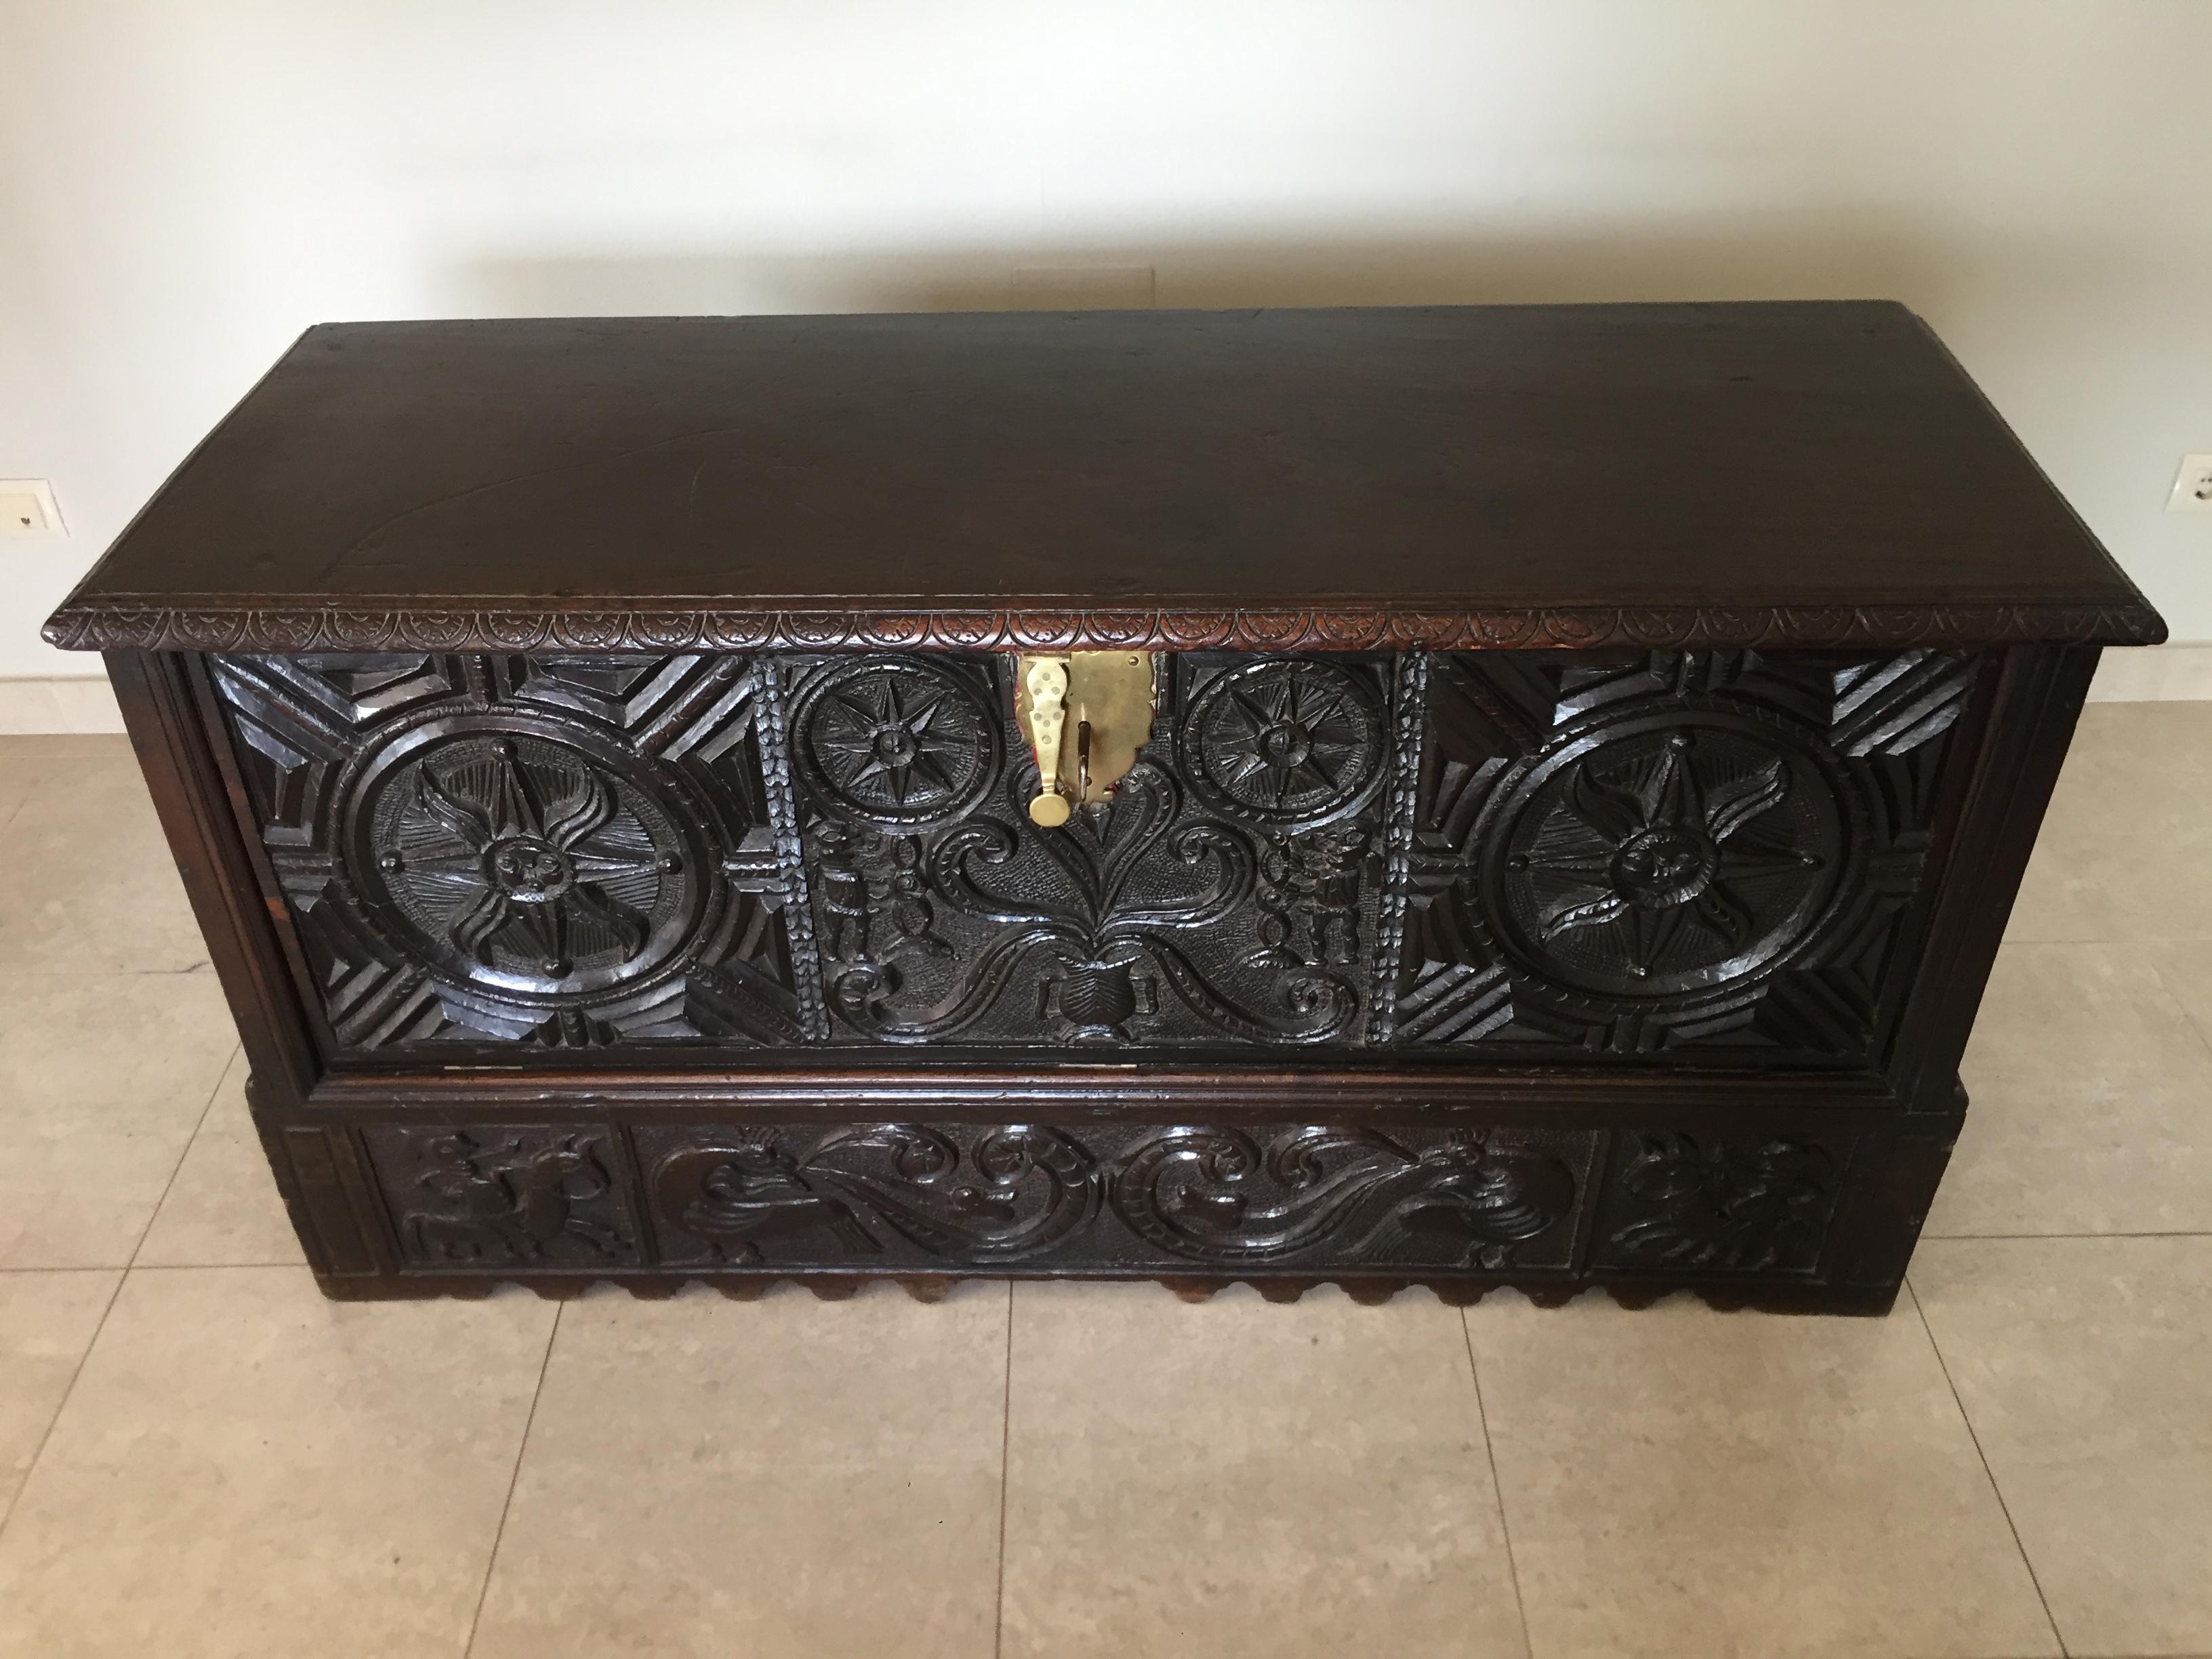 Antique and unique hand carved oak “kutxa” (box, in old Basque language) or chest, country Basque, Spain. 19th Century.
The carved decoration, very complex, is concentrated on the front of the piece of furniture. This is divided into six panels